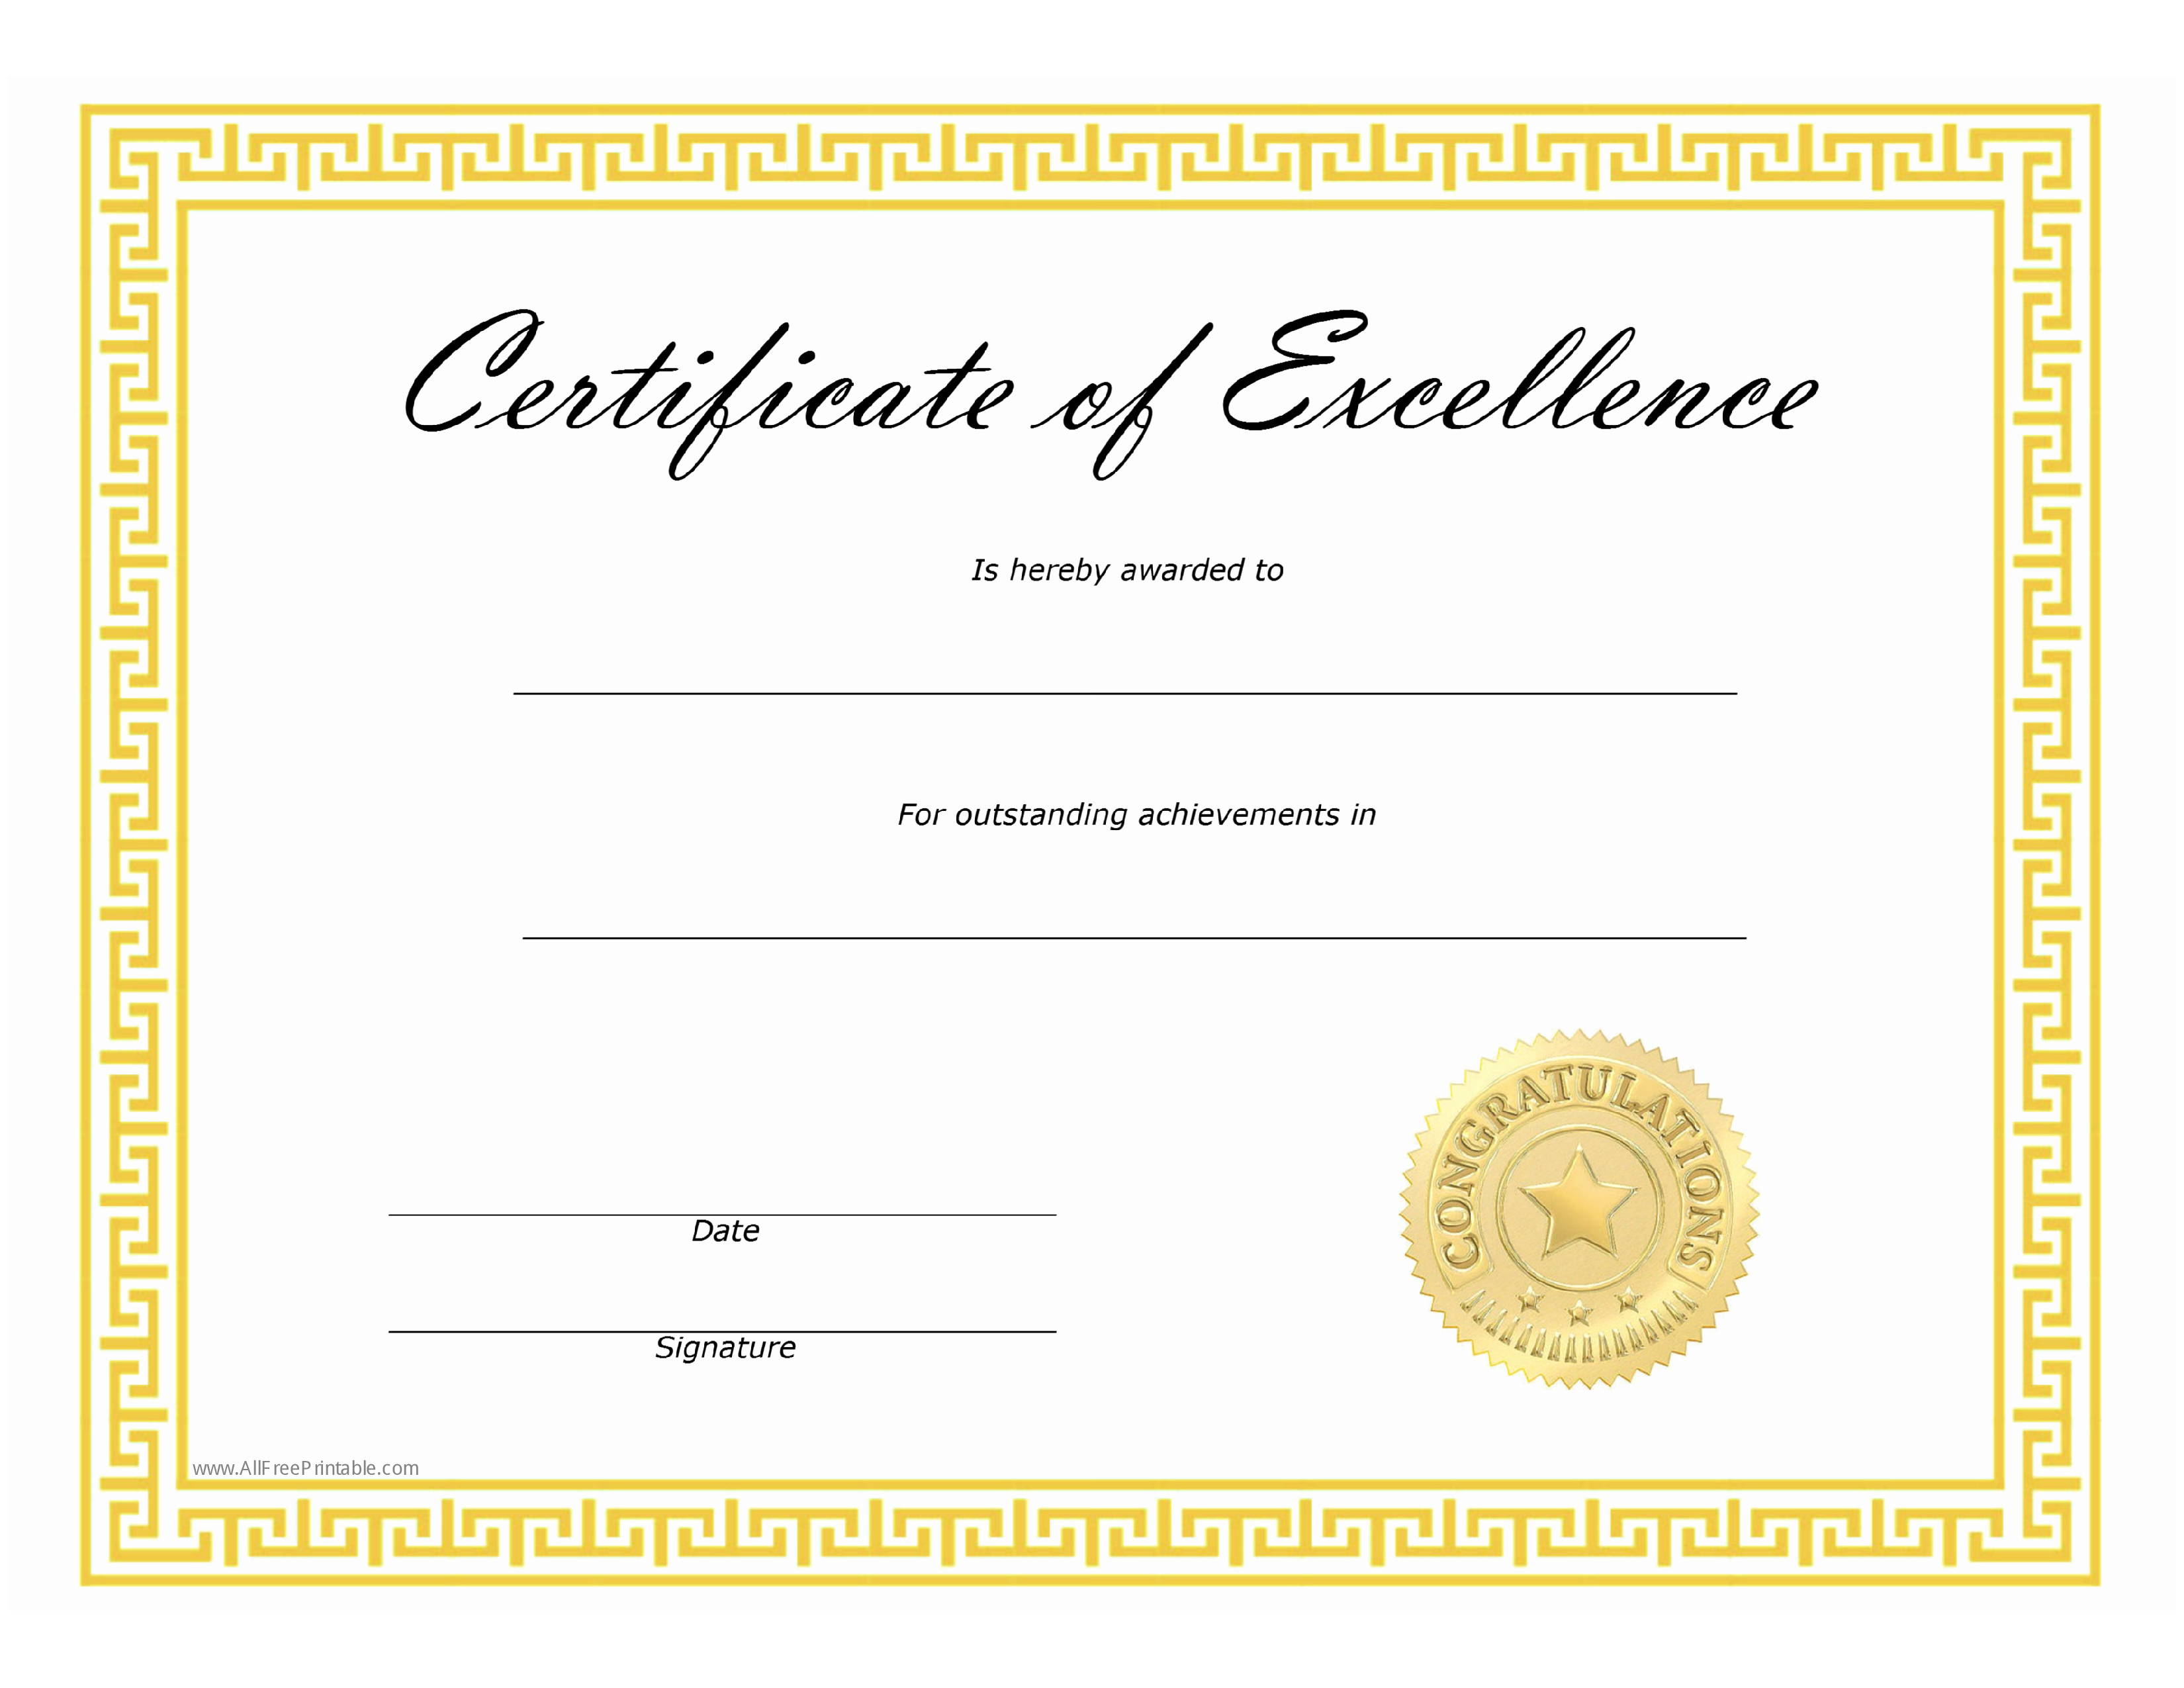 Free Certificate Of Excellence